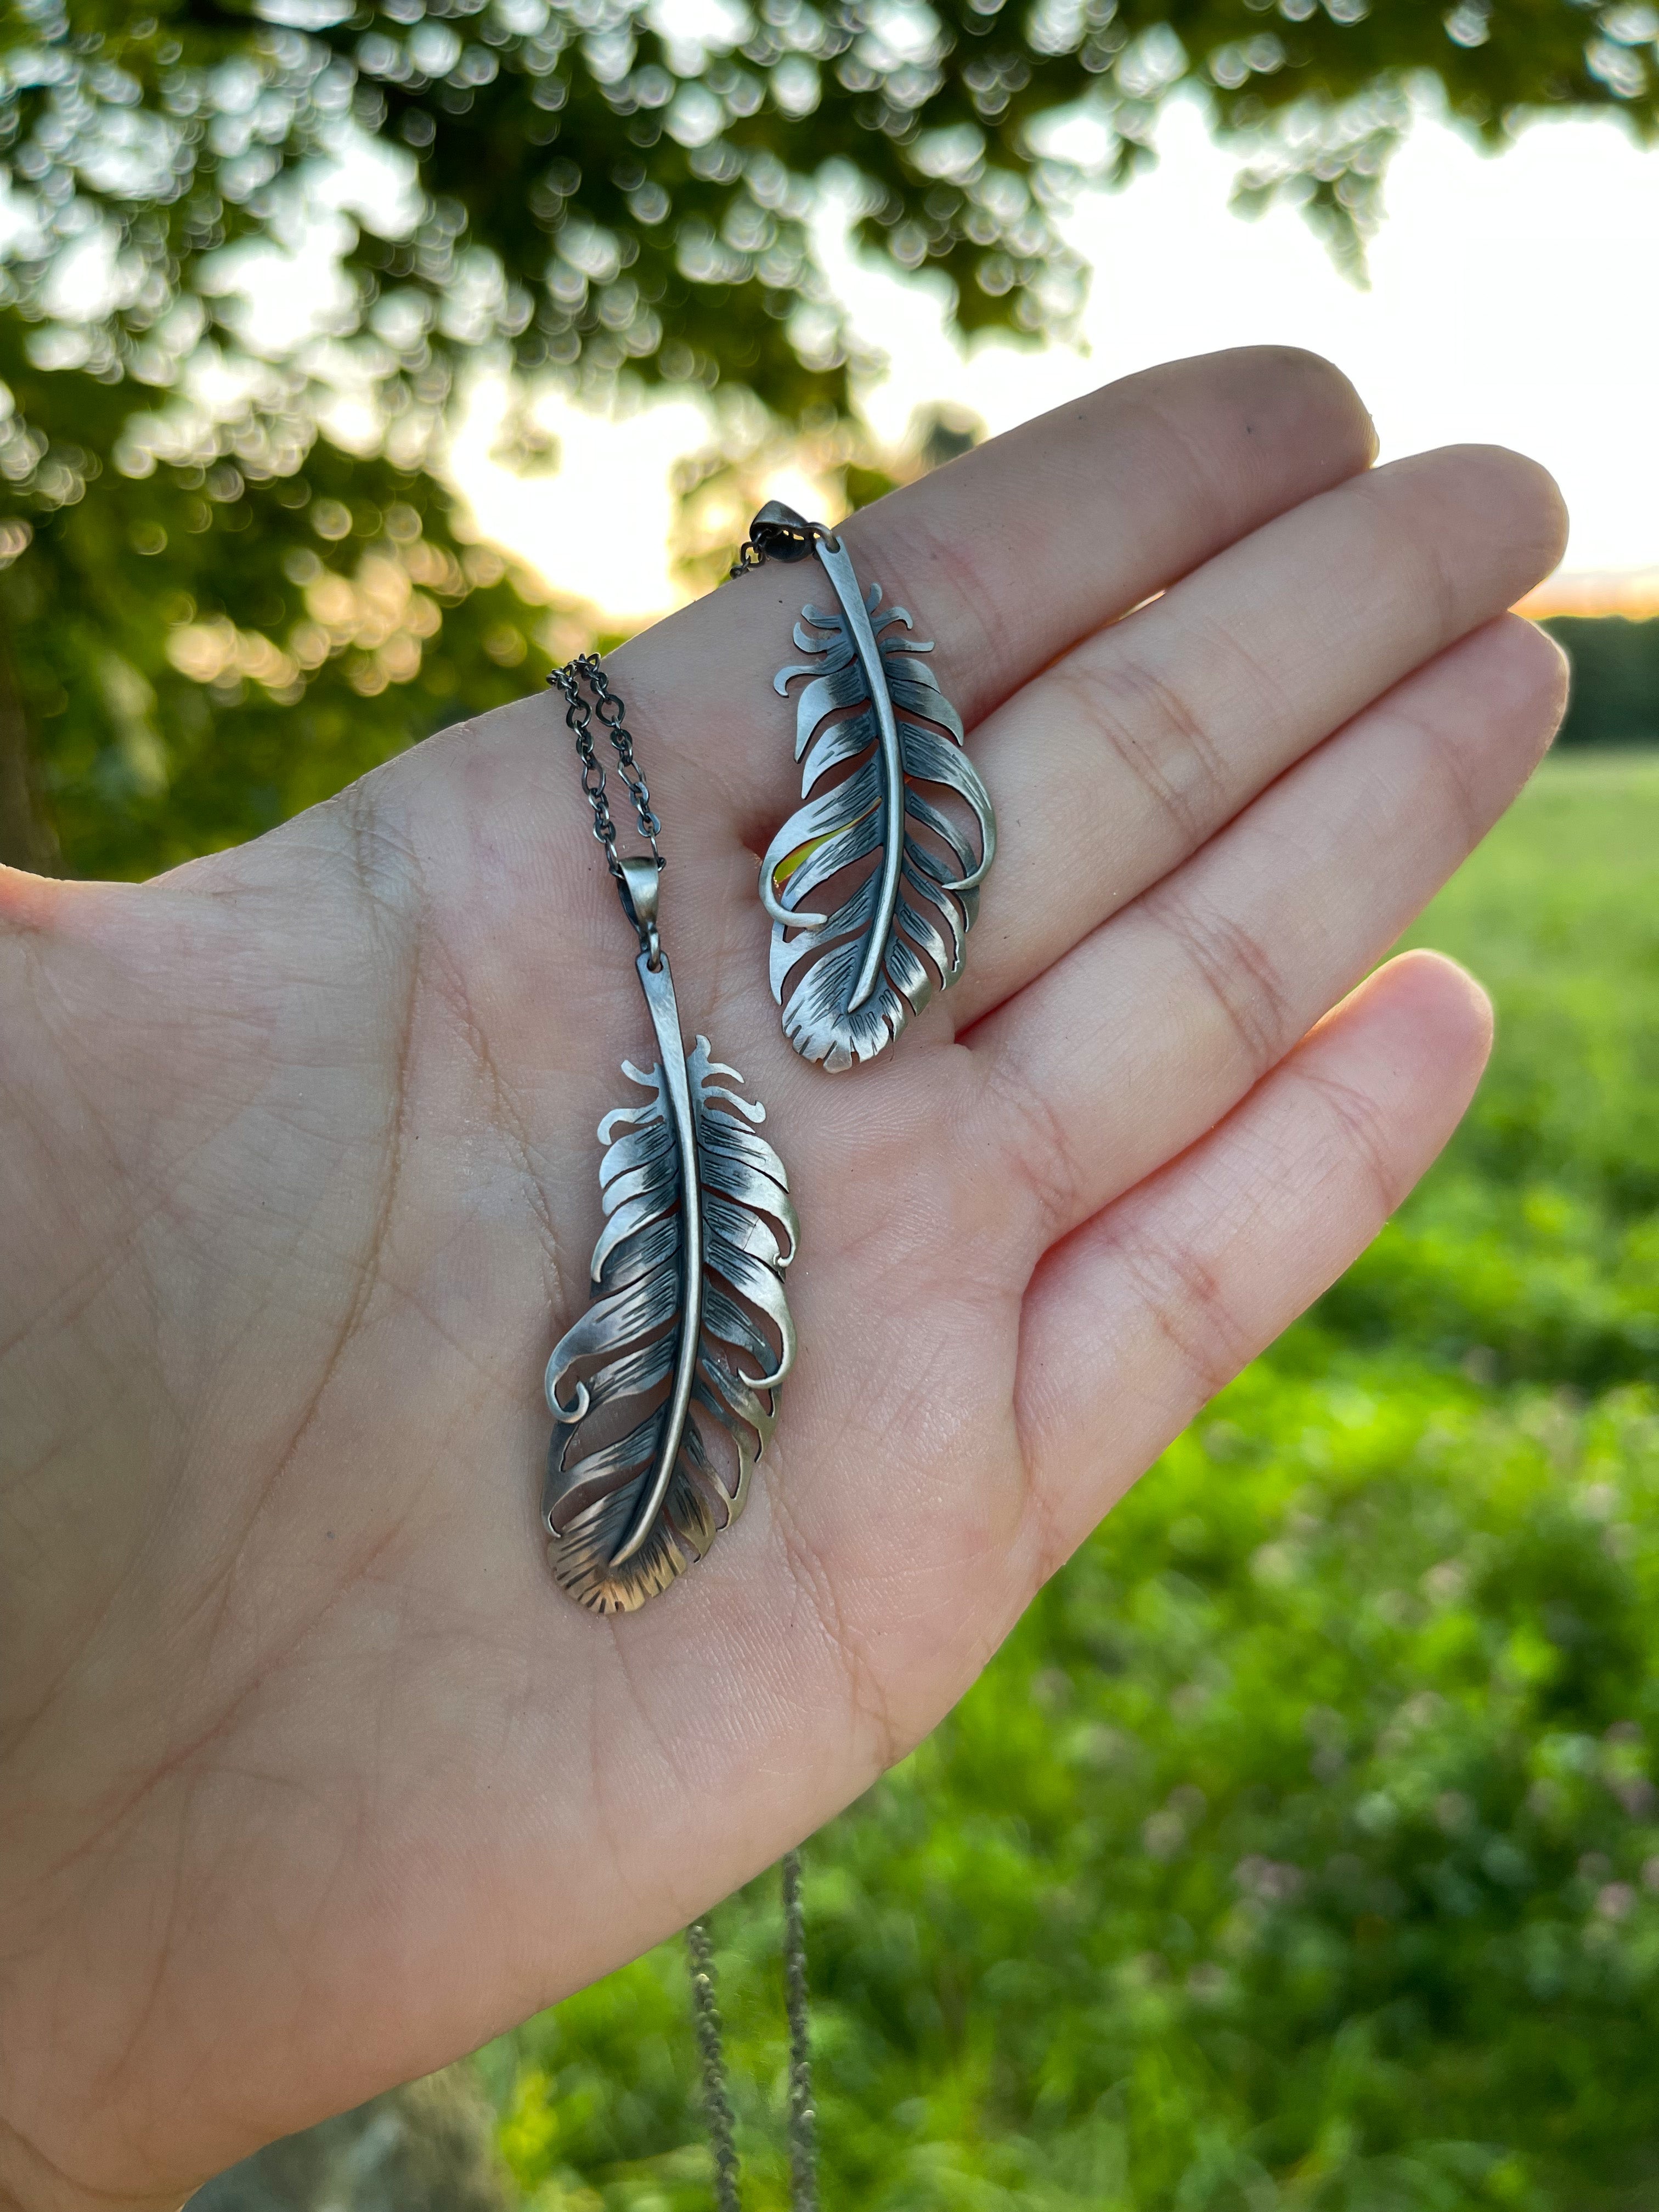 The Smaller Feather Necklace